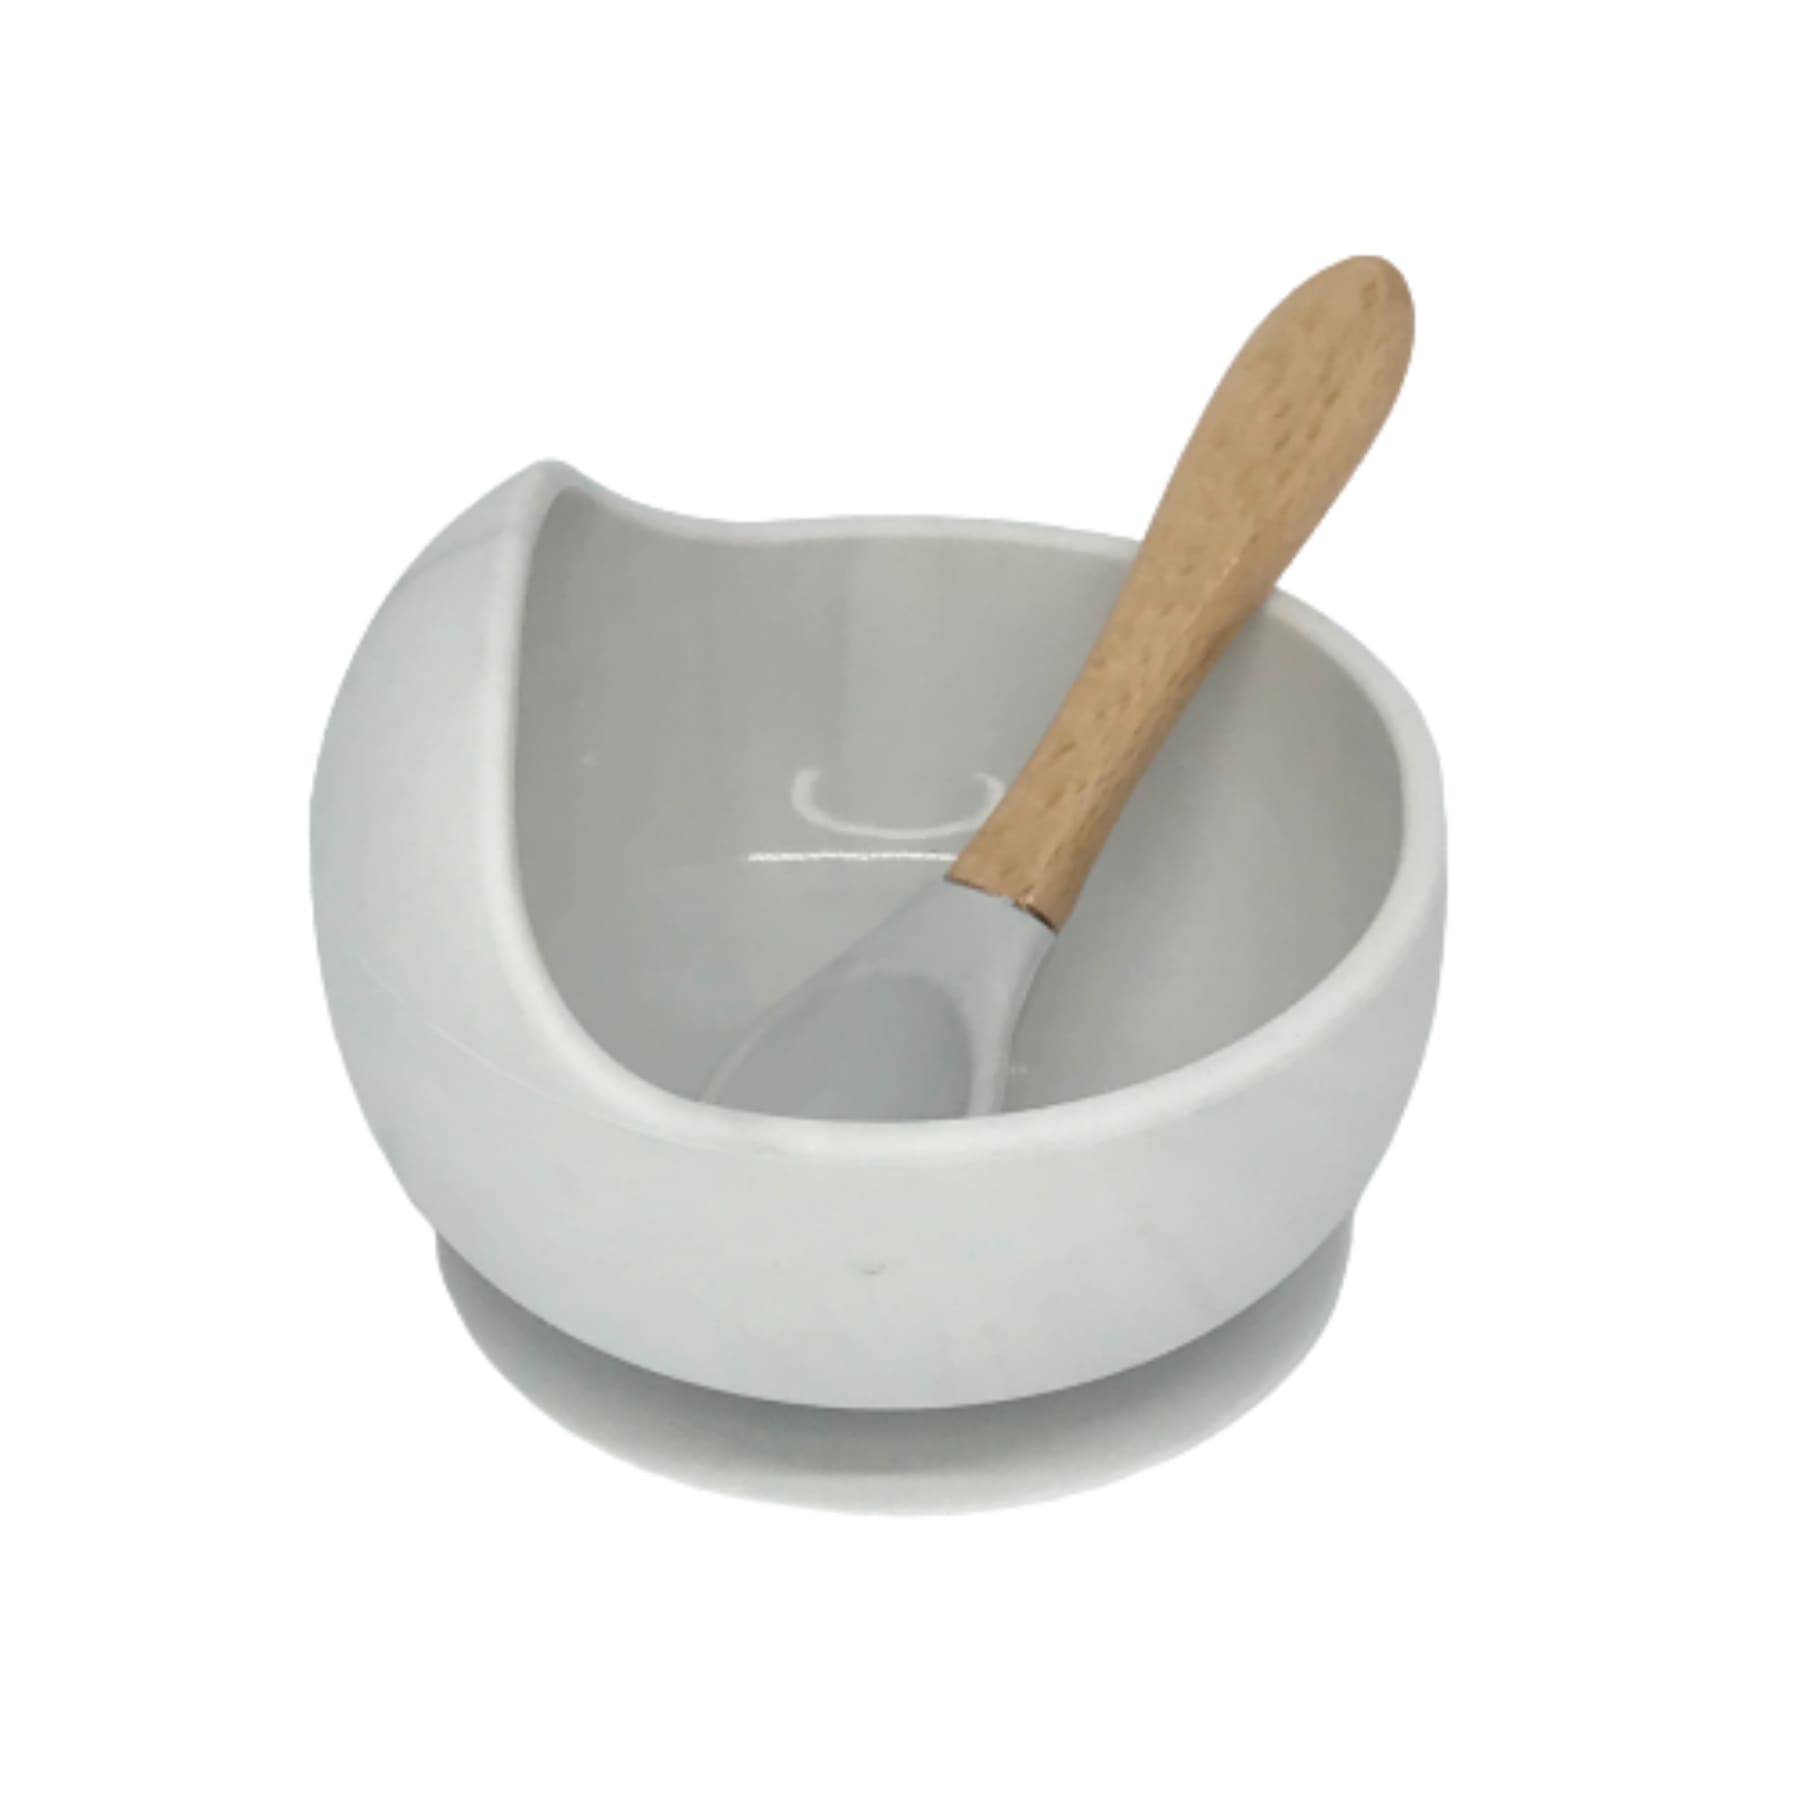 https://hunnybubbakids.com/cdn/shop/products/tool-kitchen-utensil-silicone-suction-baby-bowl-and-spoon-hunny-bubba-kids-marble-609.jpg?v=1640401853&width=1946